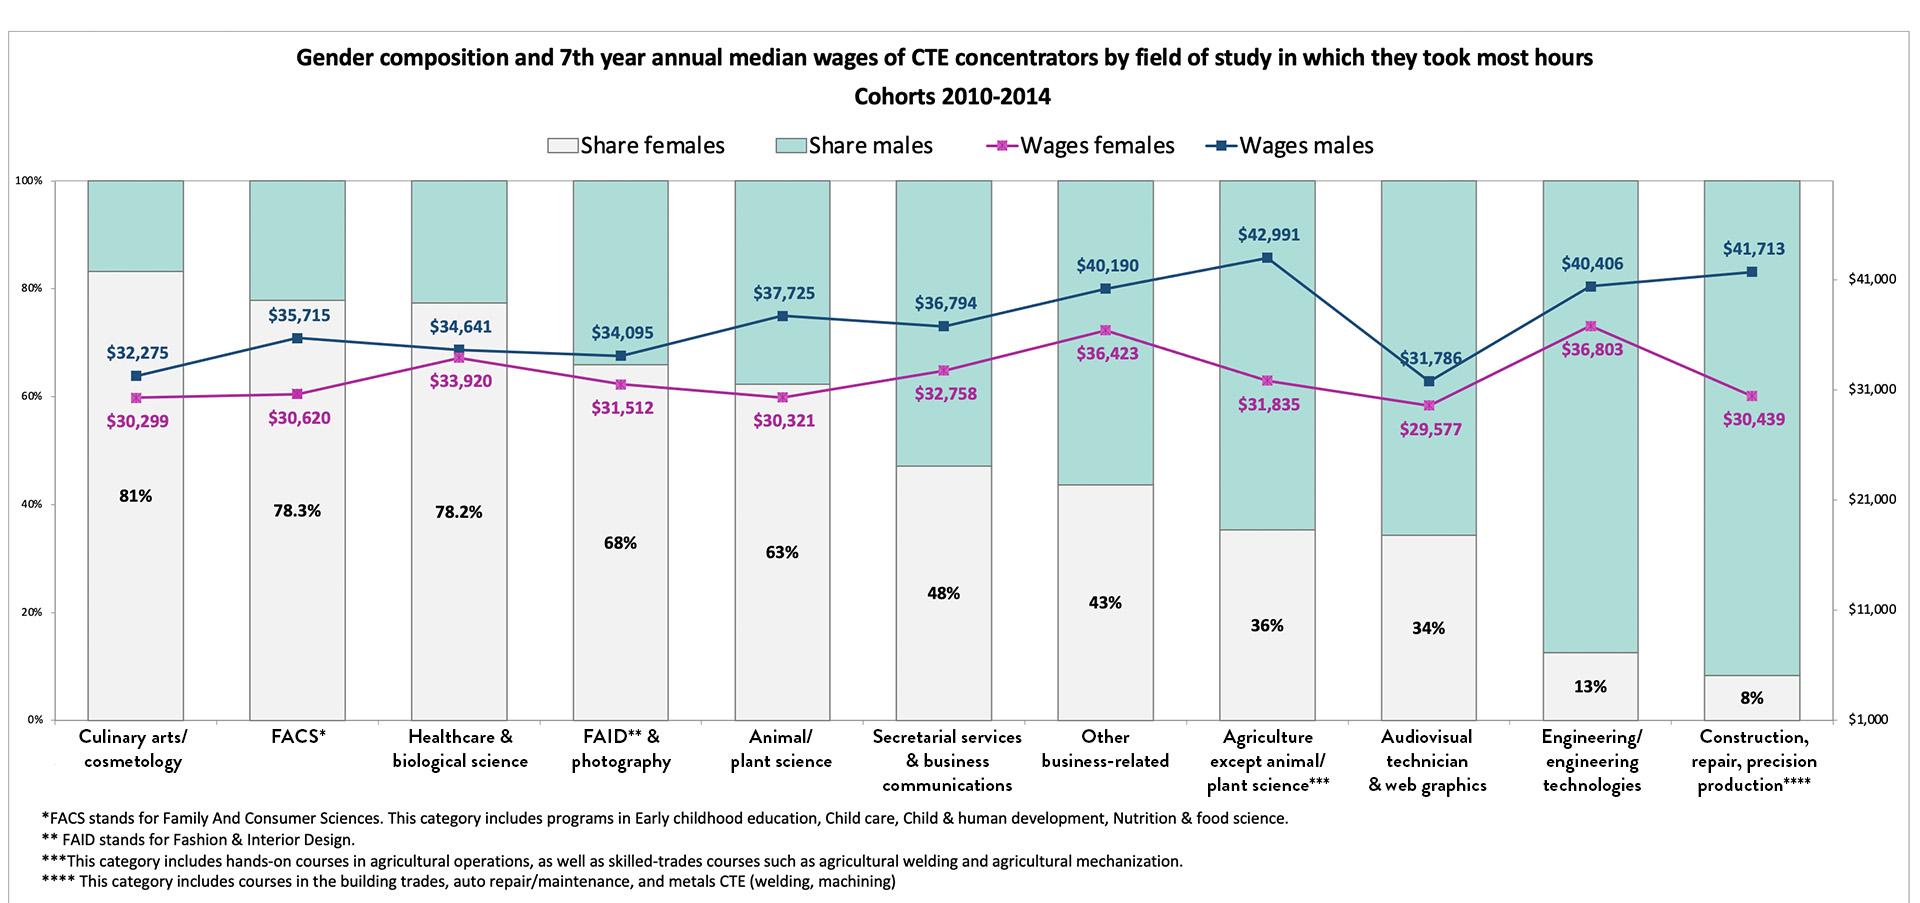 Gender Compilation and 7th Year Annual Median Wages